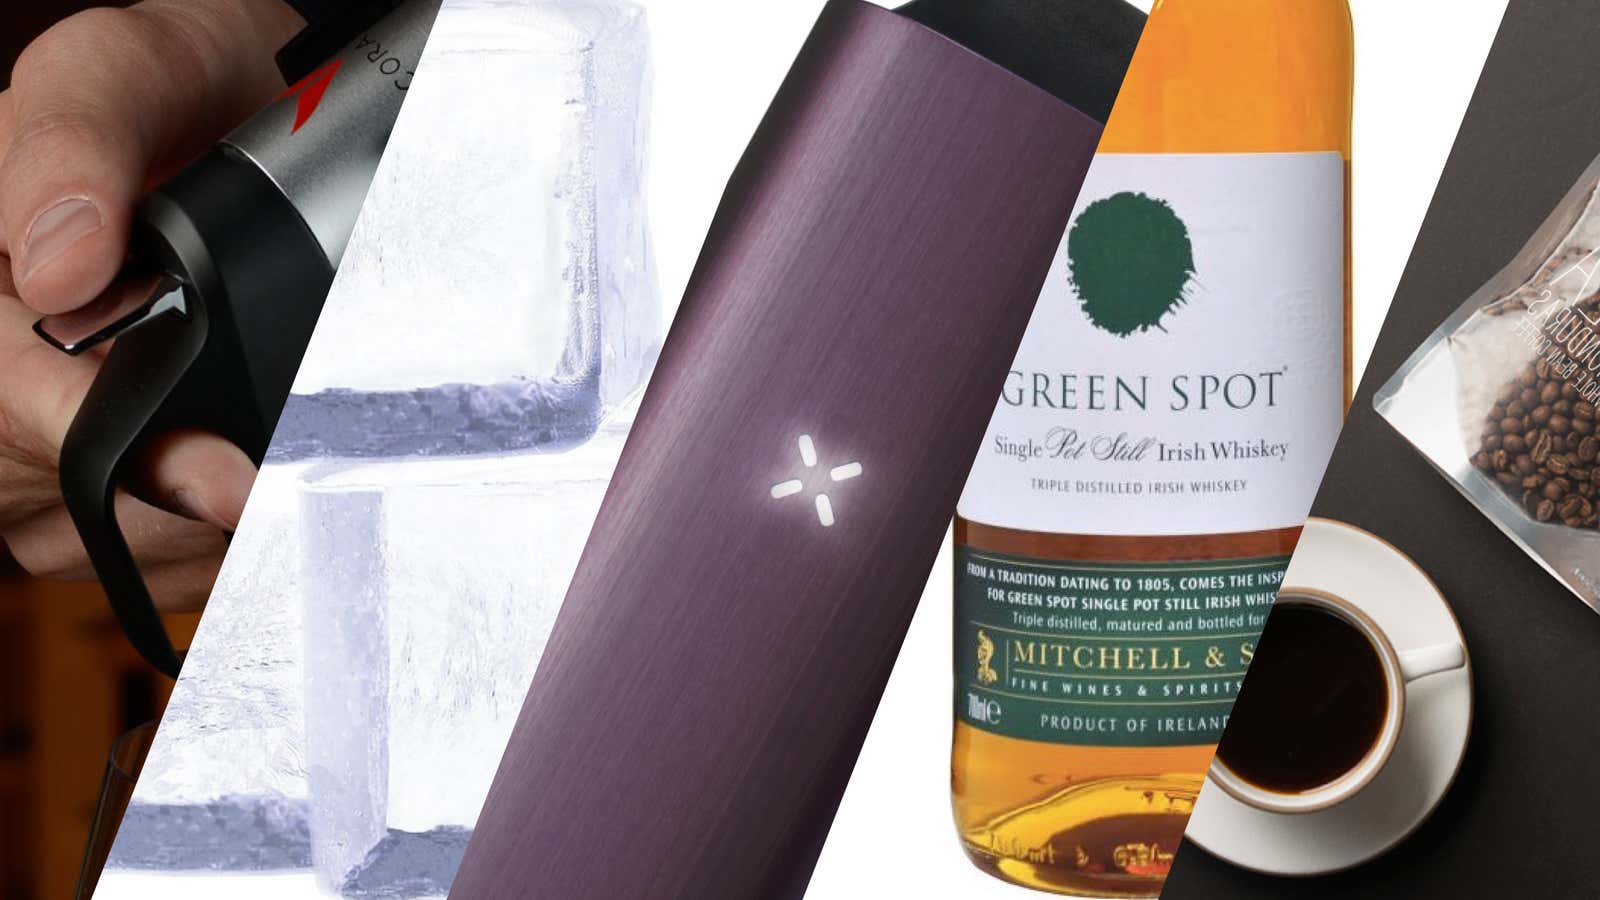 The Quartz holiday gift guide: Booze and other ways to get in the spirit